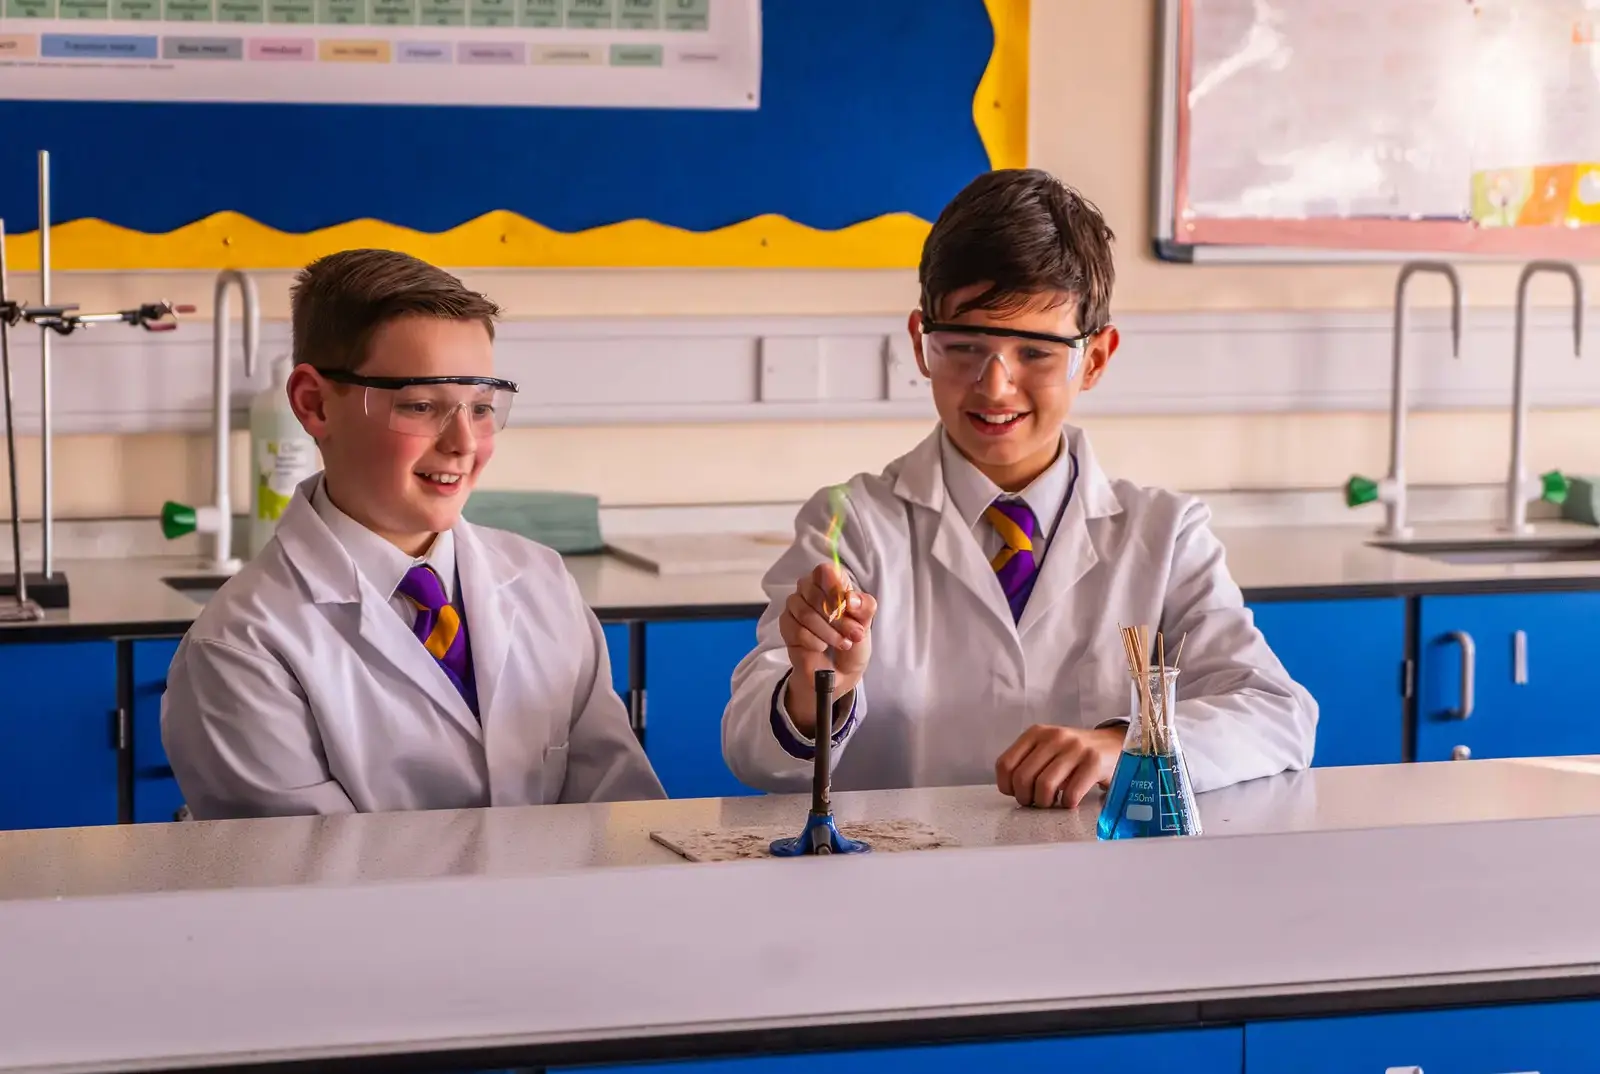 King's Magna pupils in science class